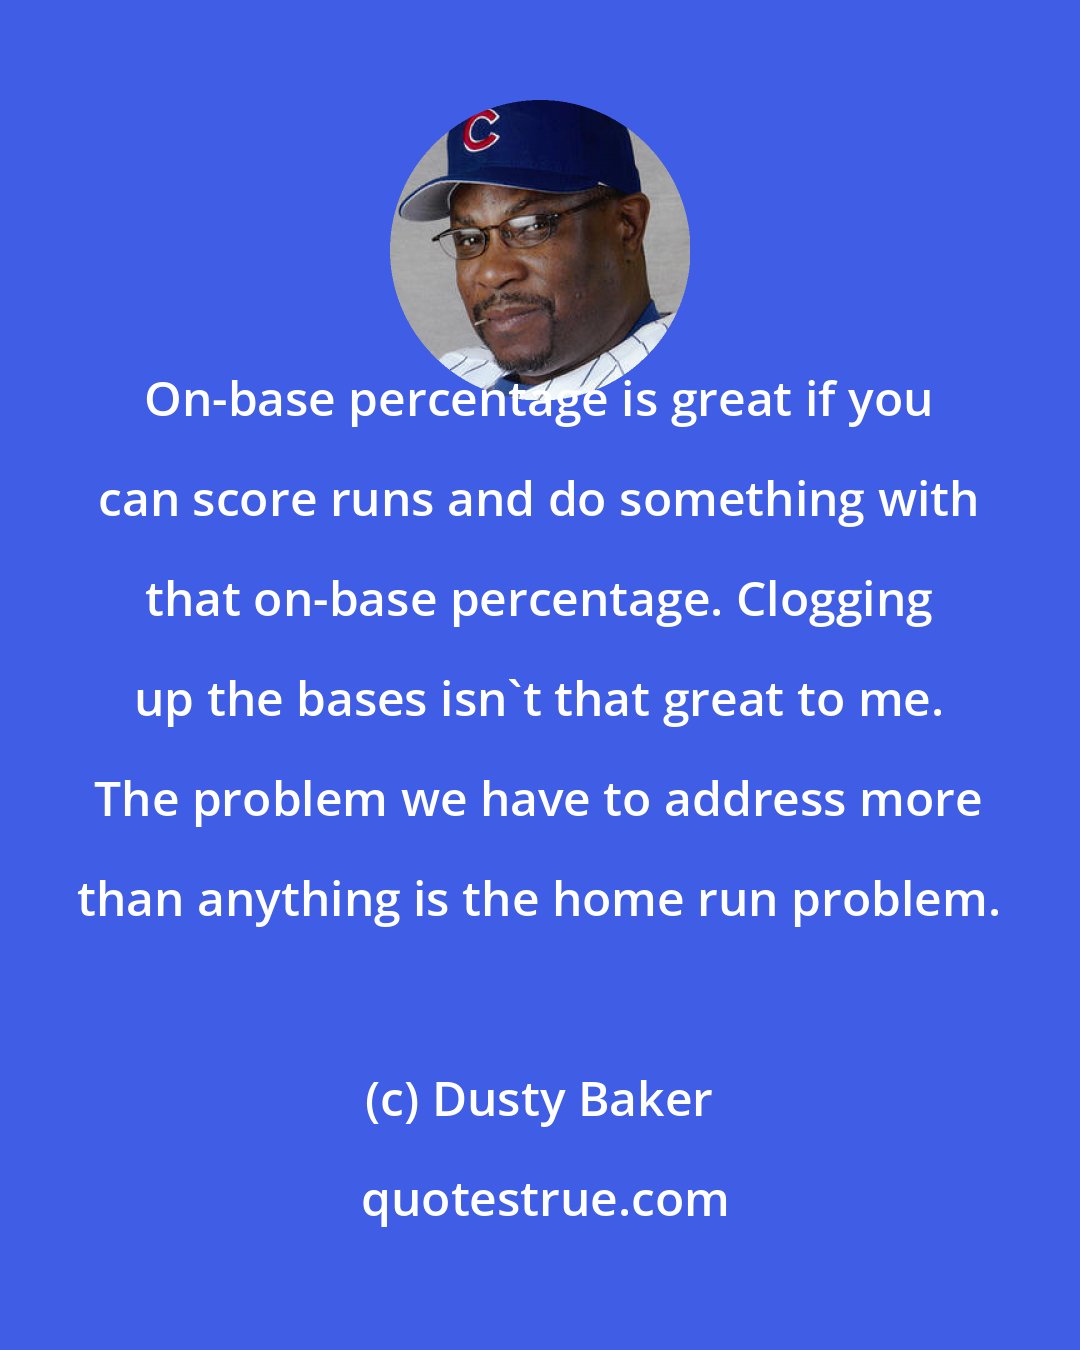 Dusty Baker: On-base percentage is great if you can score runs and do something with that on-base percentage. Clogging up the bases isn't that great to me. The problem we have to address more than anything is the home run problem.